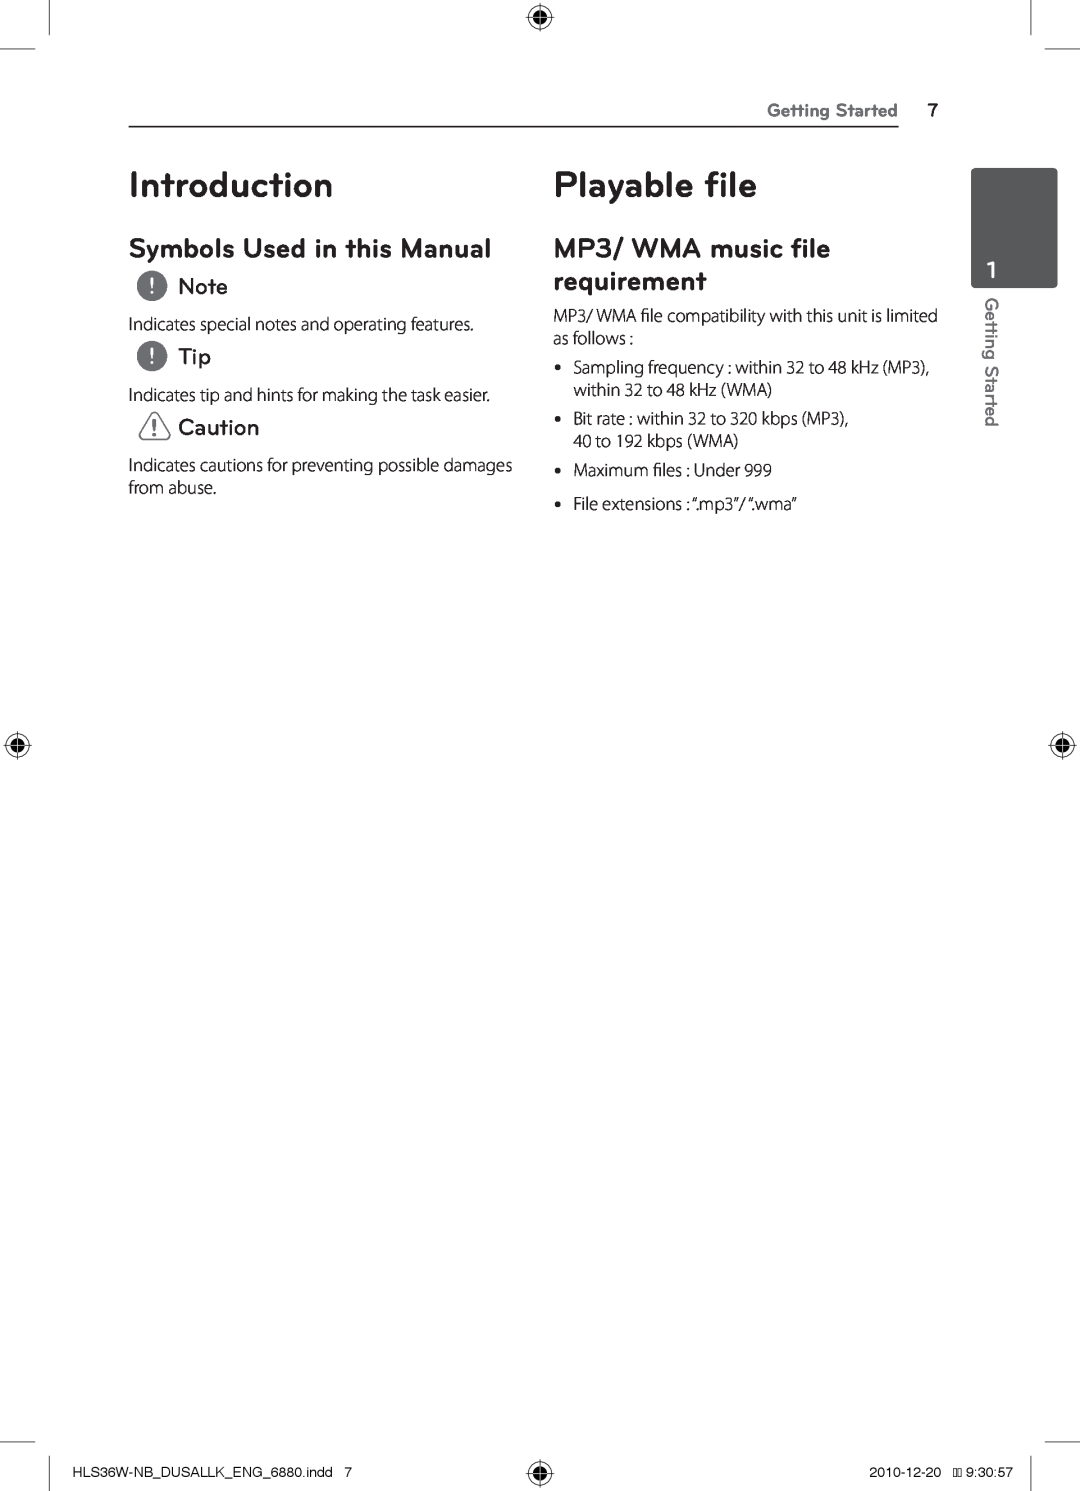 LG Electronics LSB316, SHS36-D Introduction, Playable file, Symbols Used in this Manual, MP3/ WMA music file requirement 